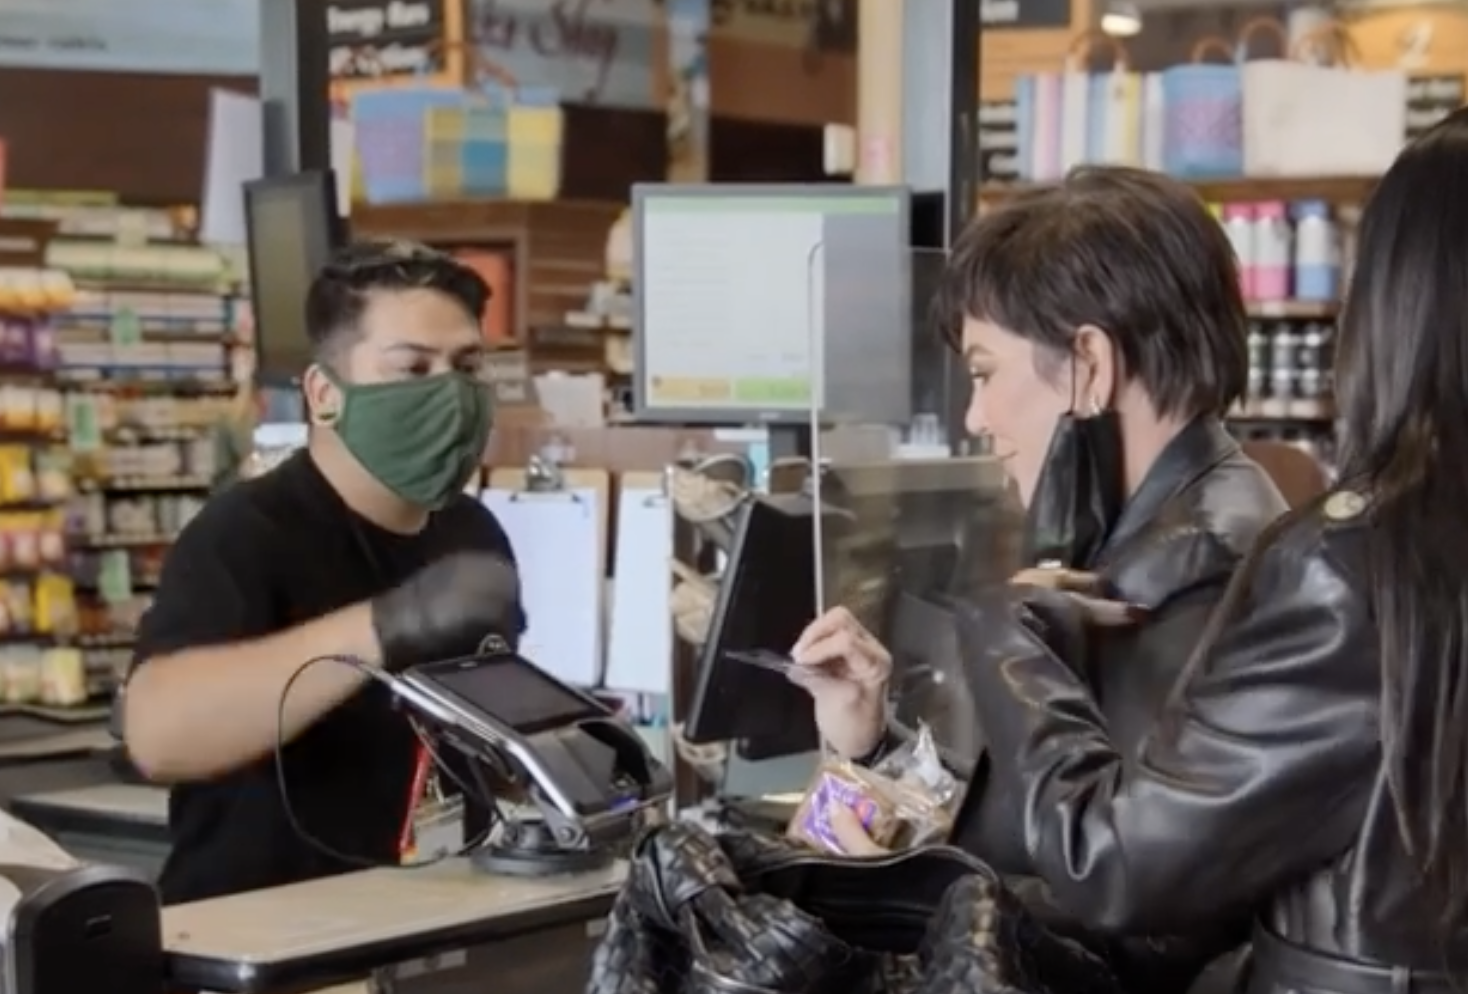 Kris Jenner, face mask off, uses a credit card at checkout by a checkout attendant wearing gloves and a face mask